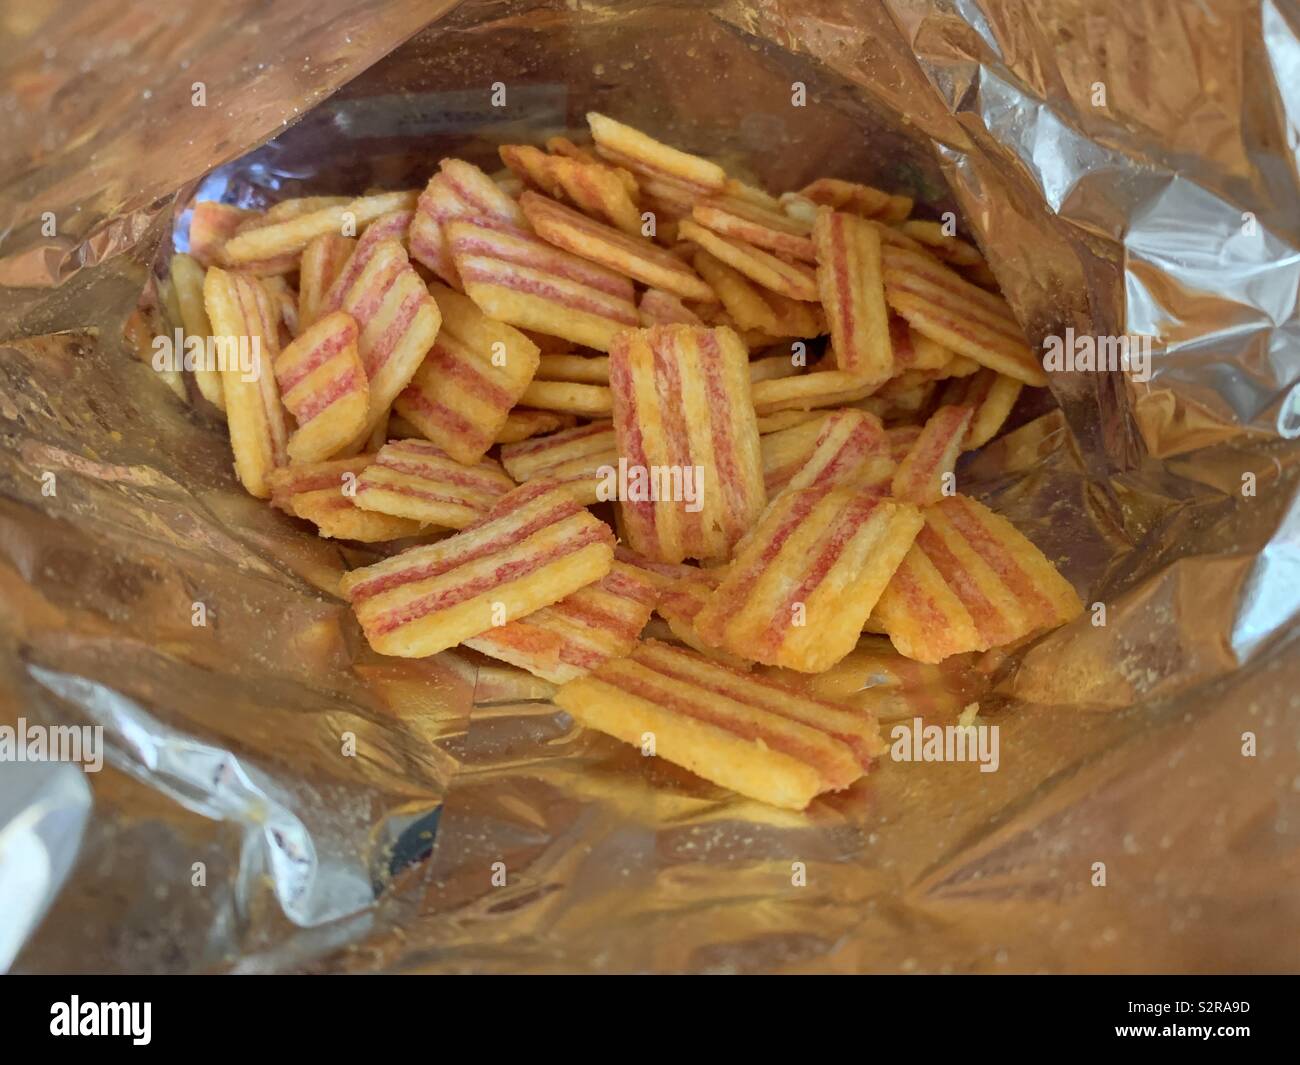 Inside a packet of bacon fries Stock Photo